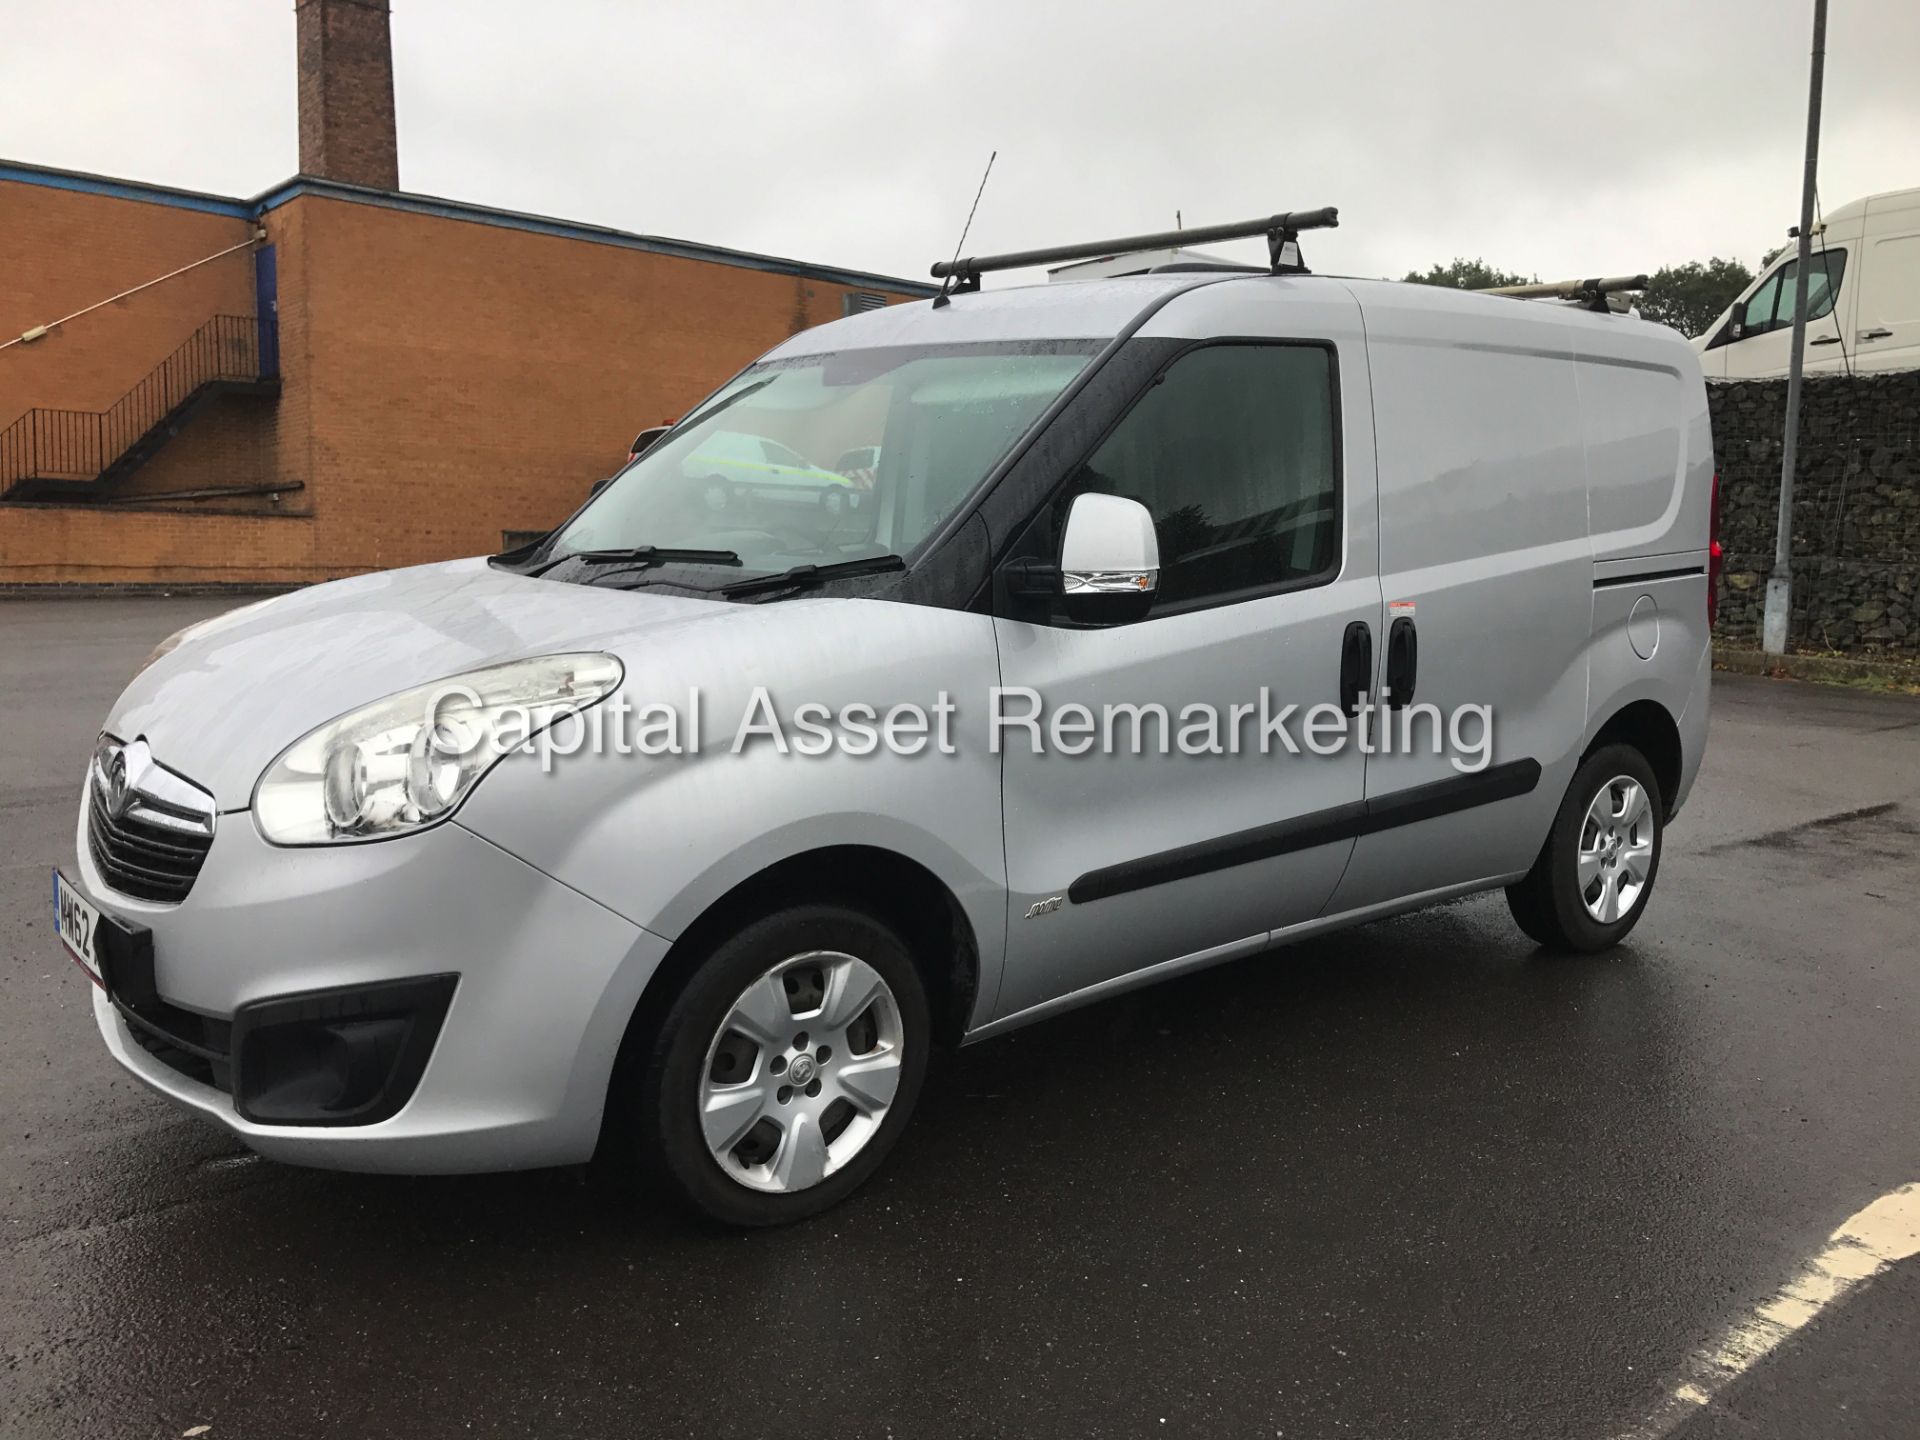 On Sale VAUXHALL COMBO 1.3CDTI "SPORTIVE - 90BHP" 1 OWNER (2013 MODEL) AIR CON - ELEC PACK - Wow!!!!